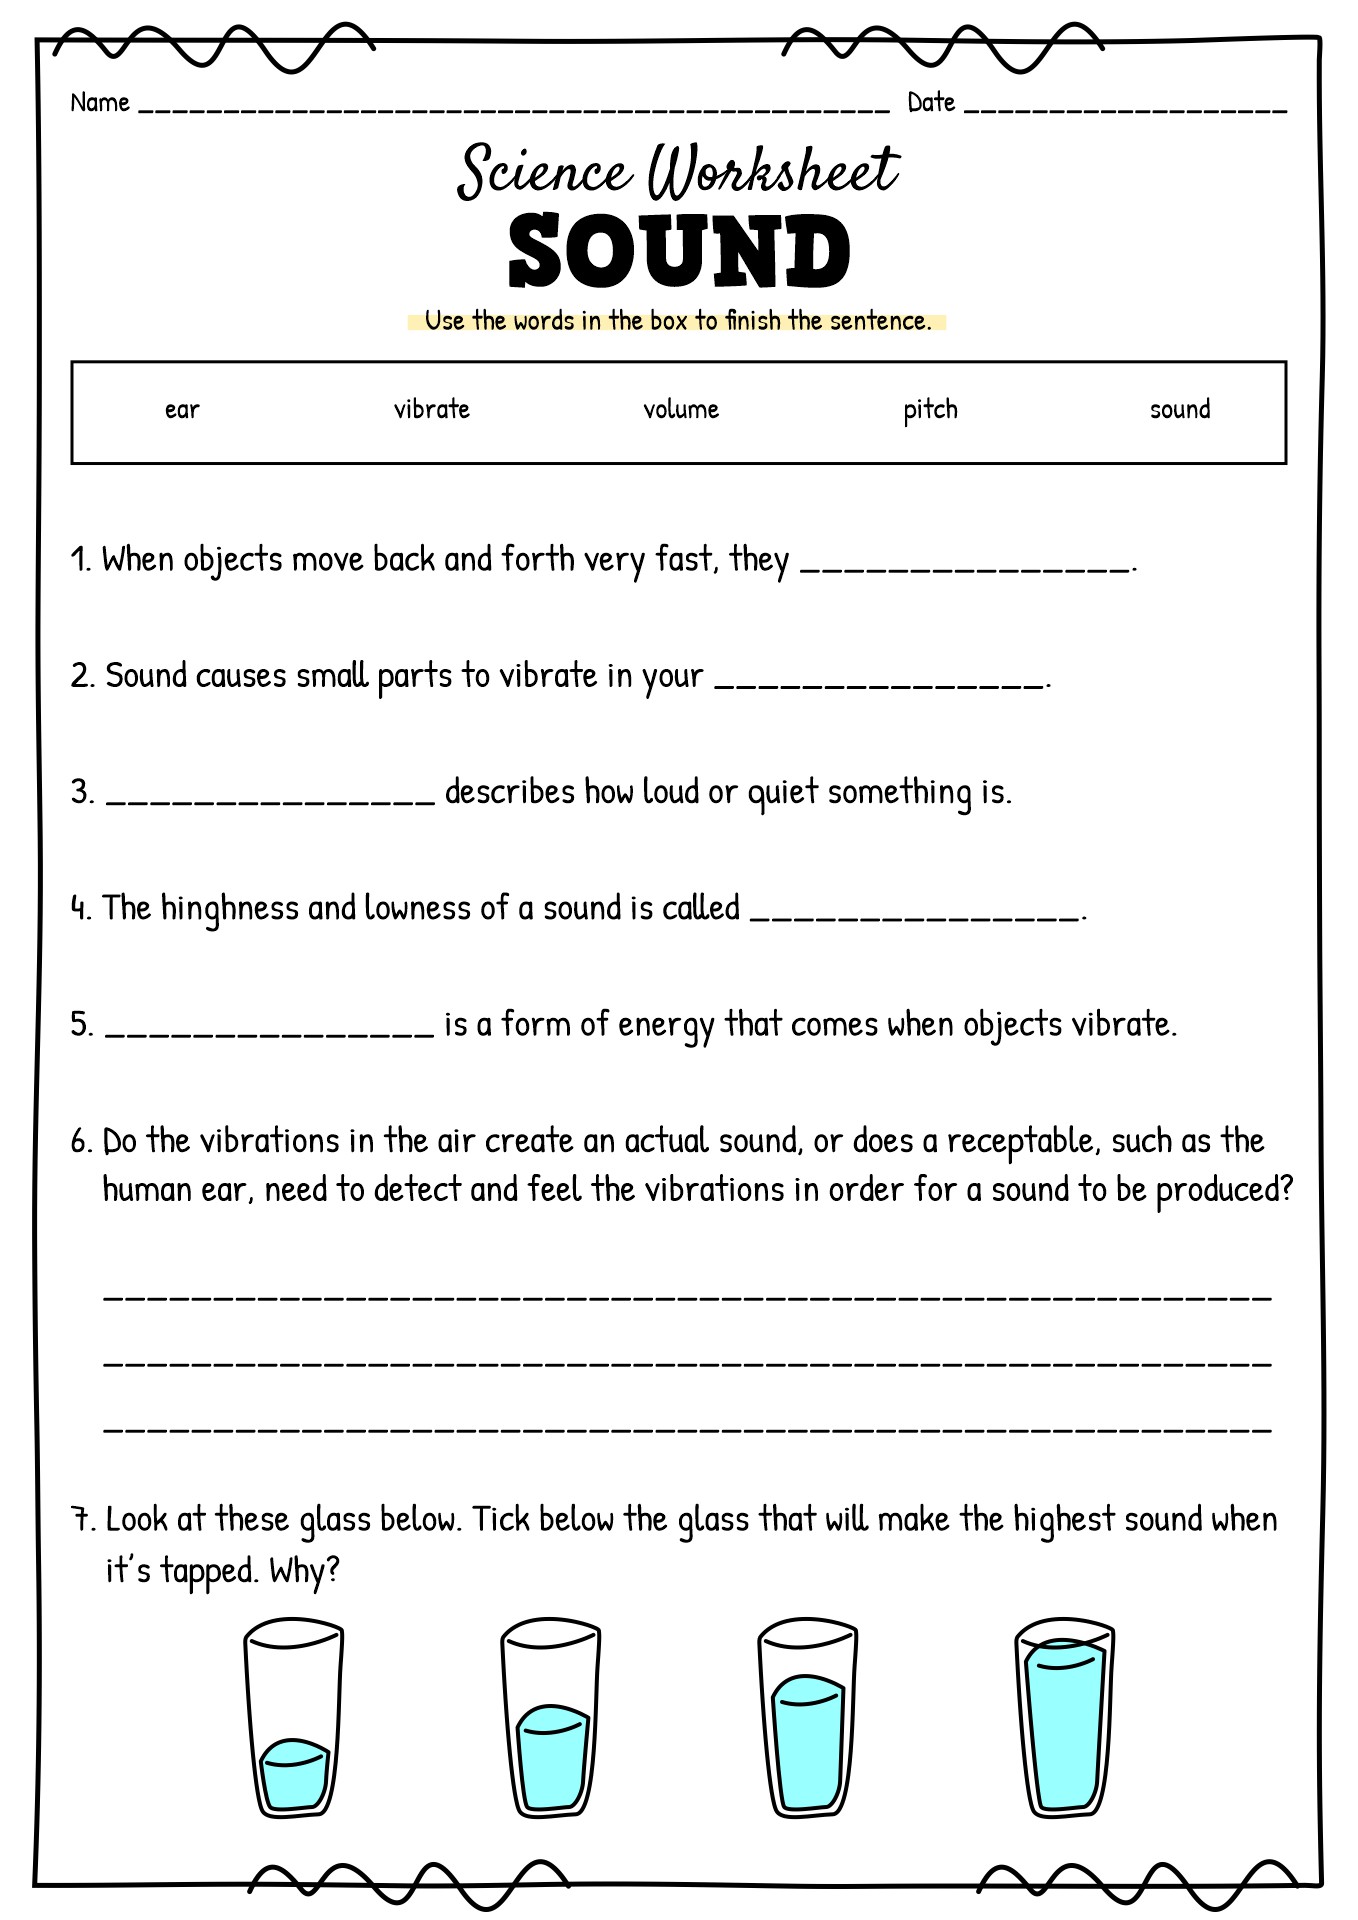 Elementary Science Sound Worksheets Image